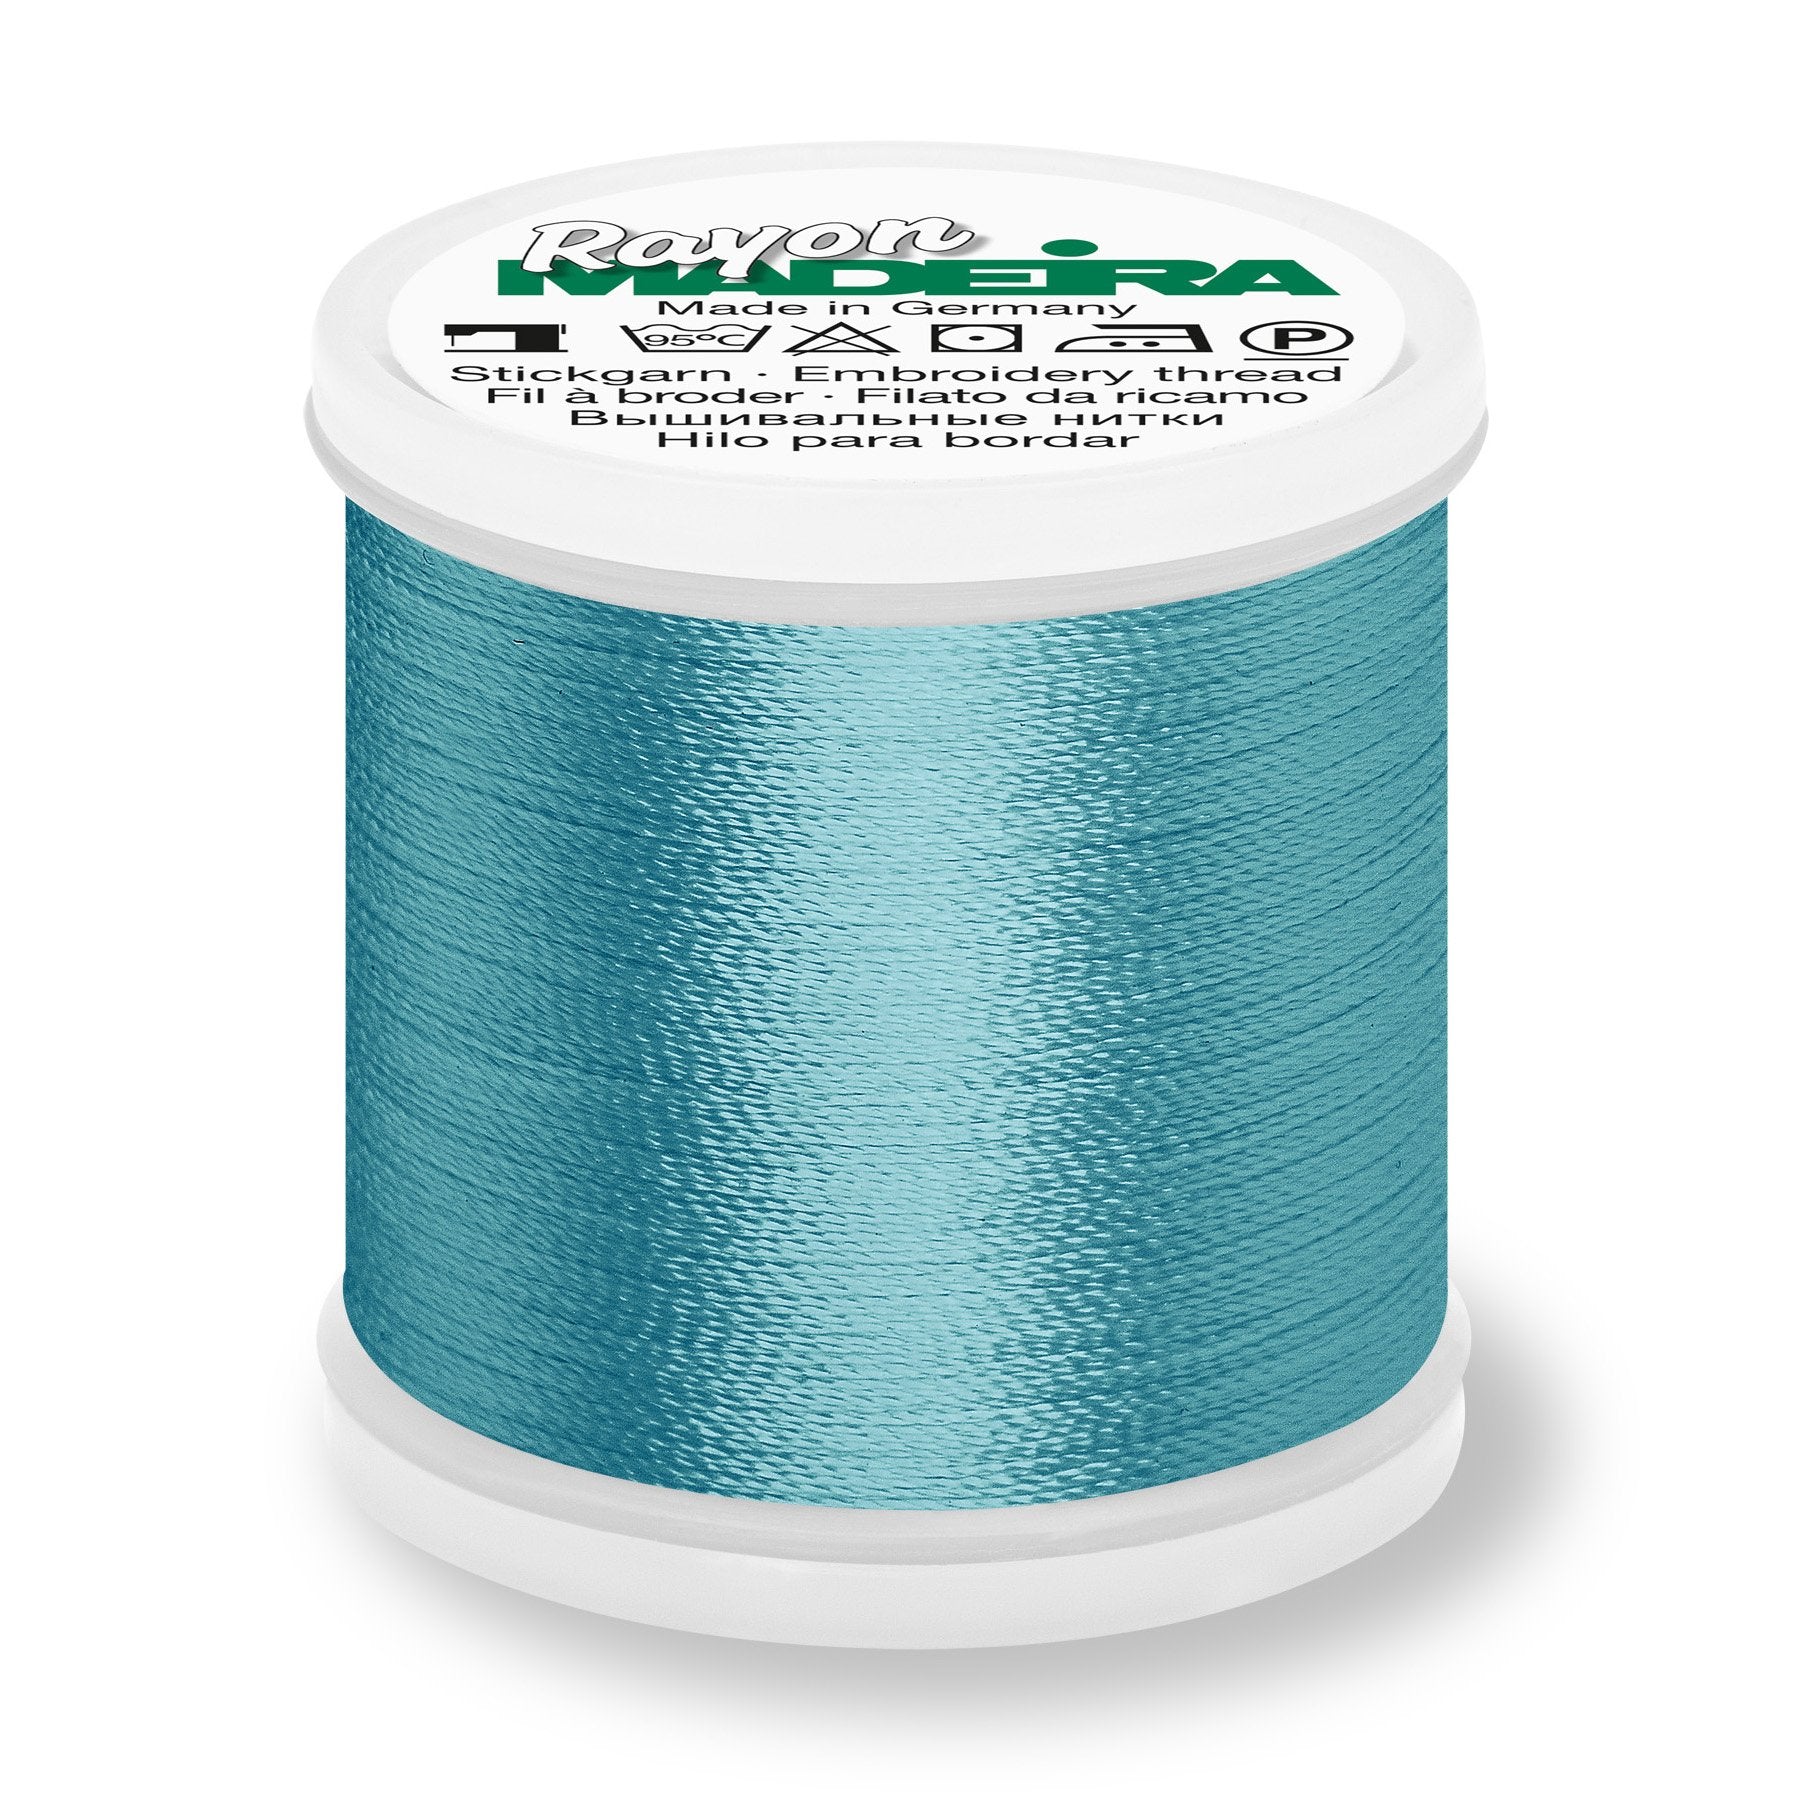 Madeira Rayon 40 Embroidery Thread 200m #1096 Duck Wing Blue from Jaycotts Sewing Supplies